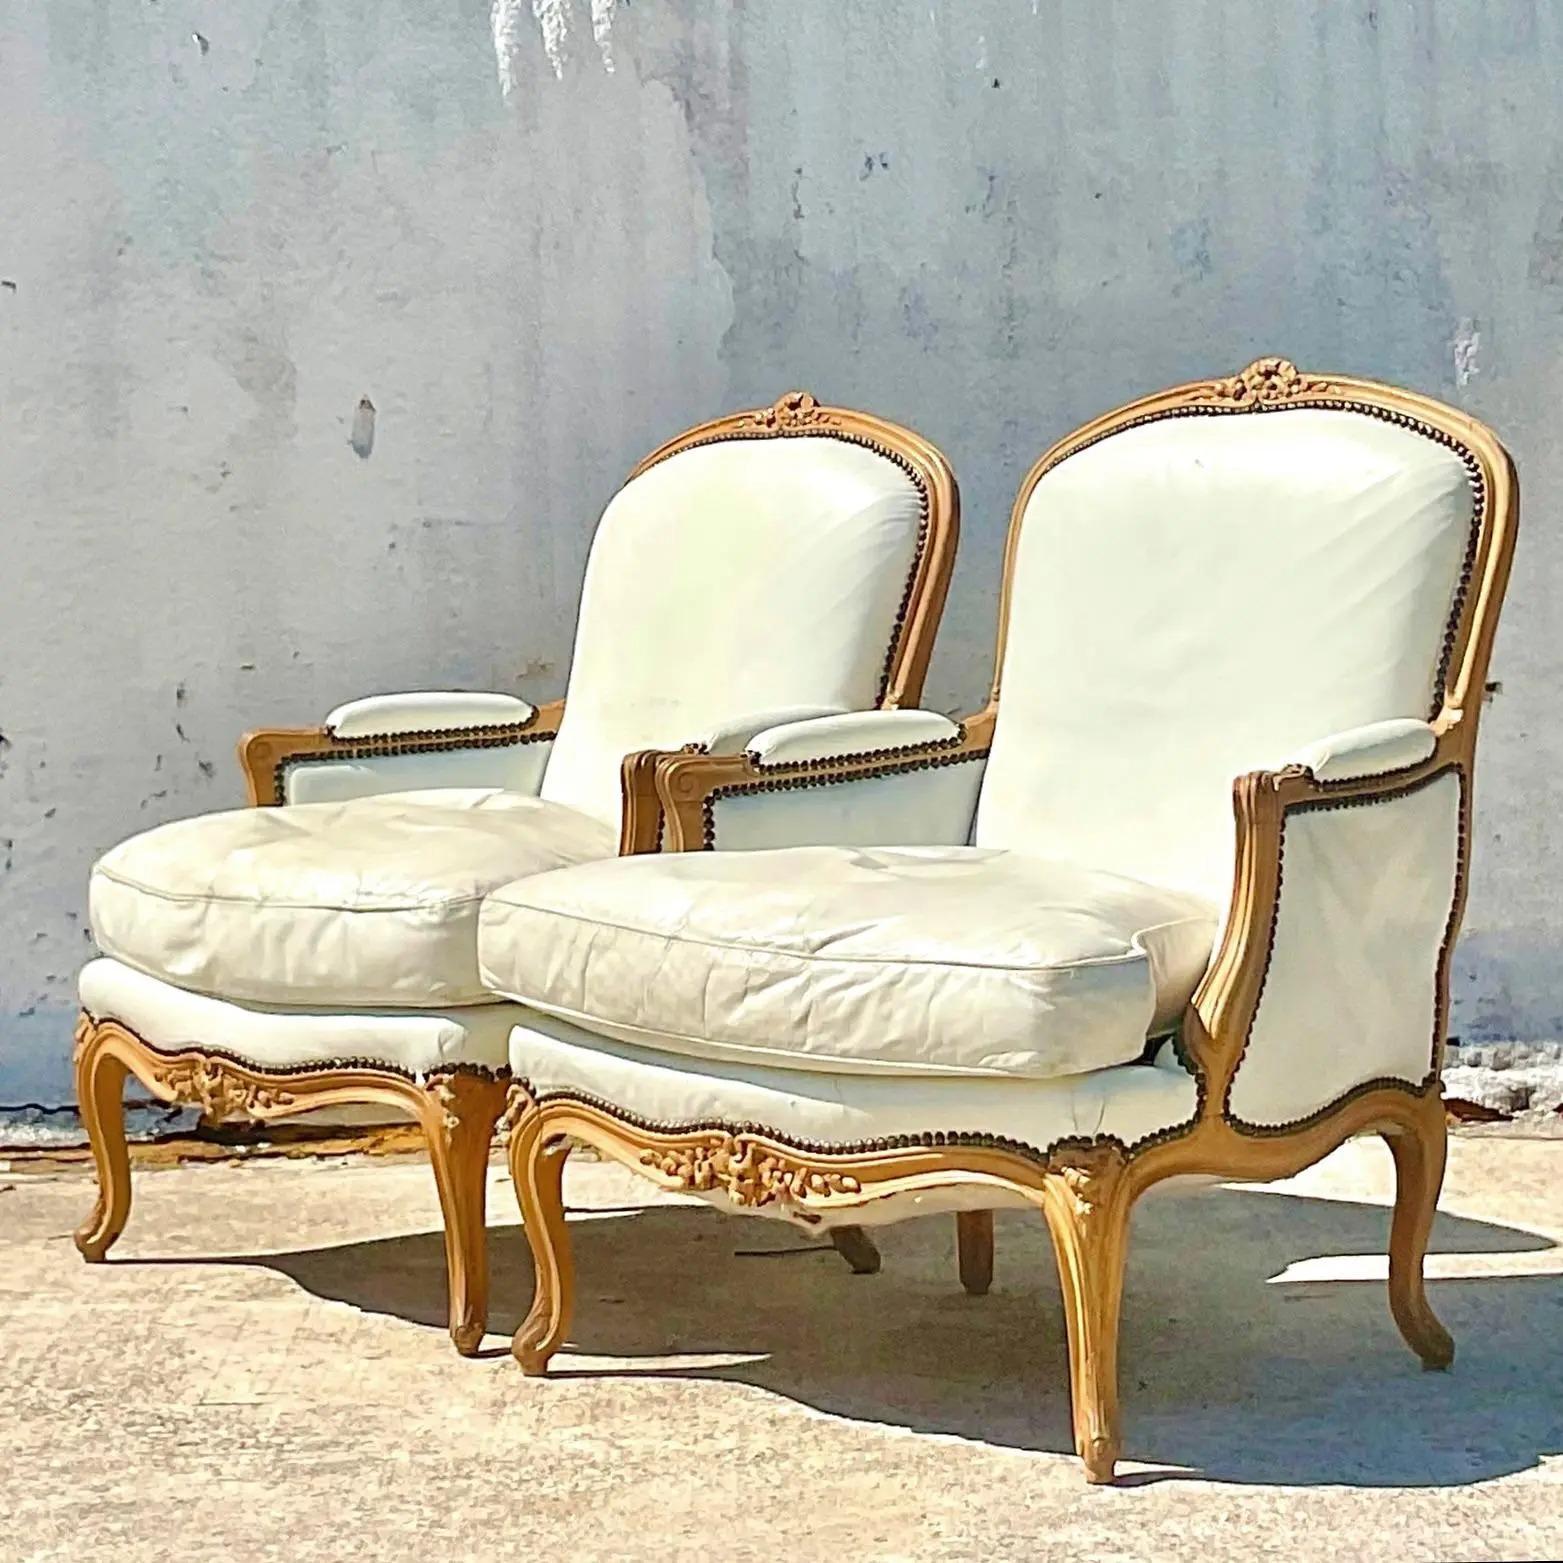 20th Century Vintage Boho John Dickinson White Leather Bergere Chairs - a Pair For Sale